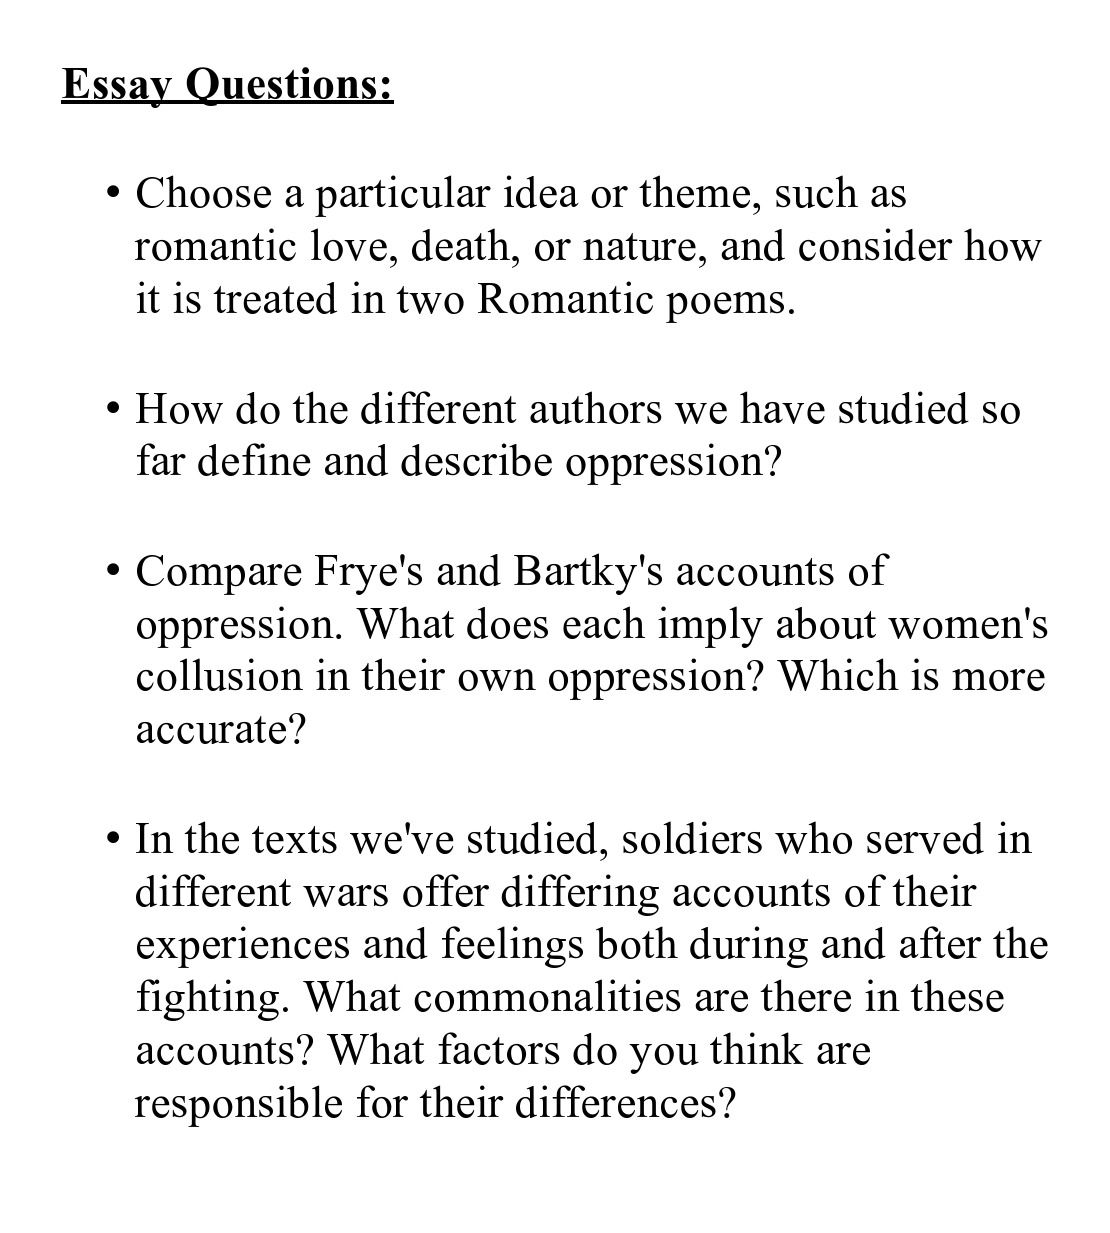 what does evaluate mean in an essay question